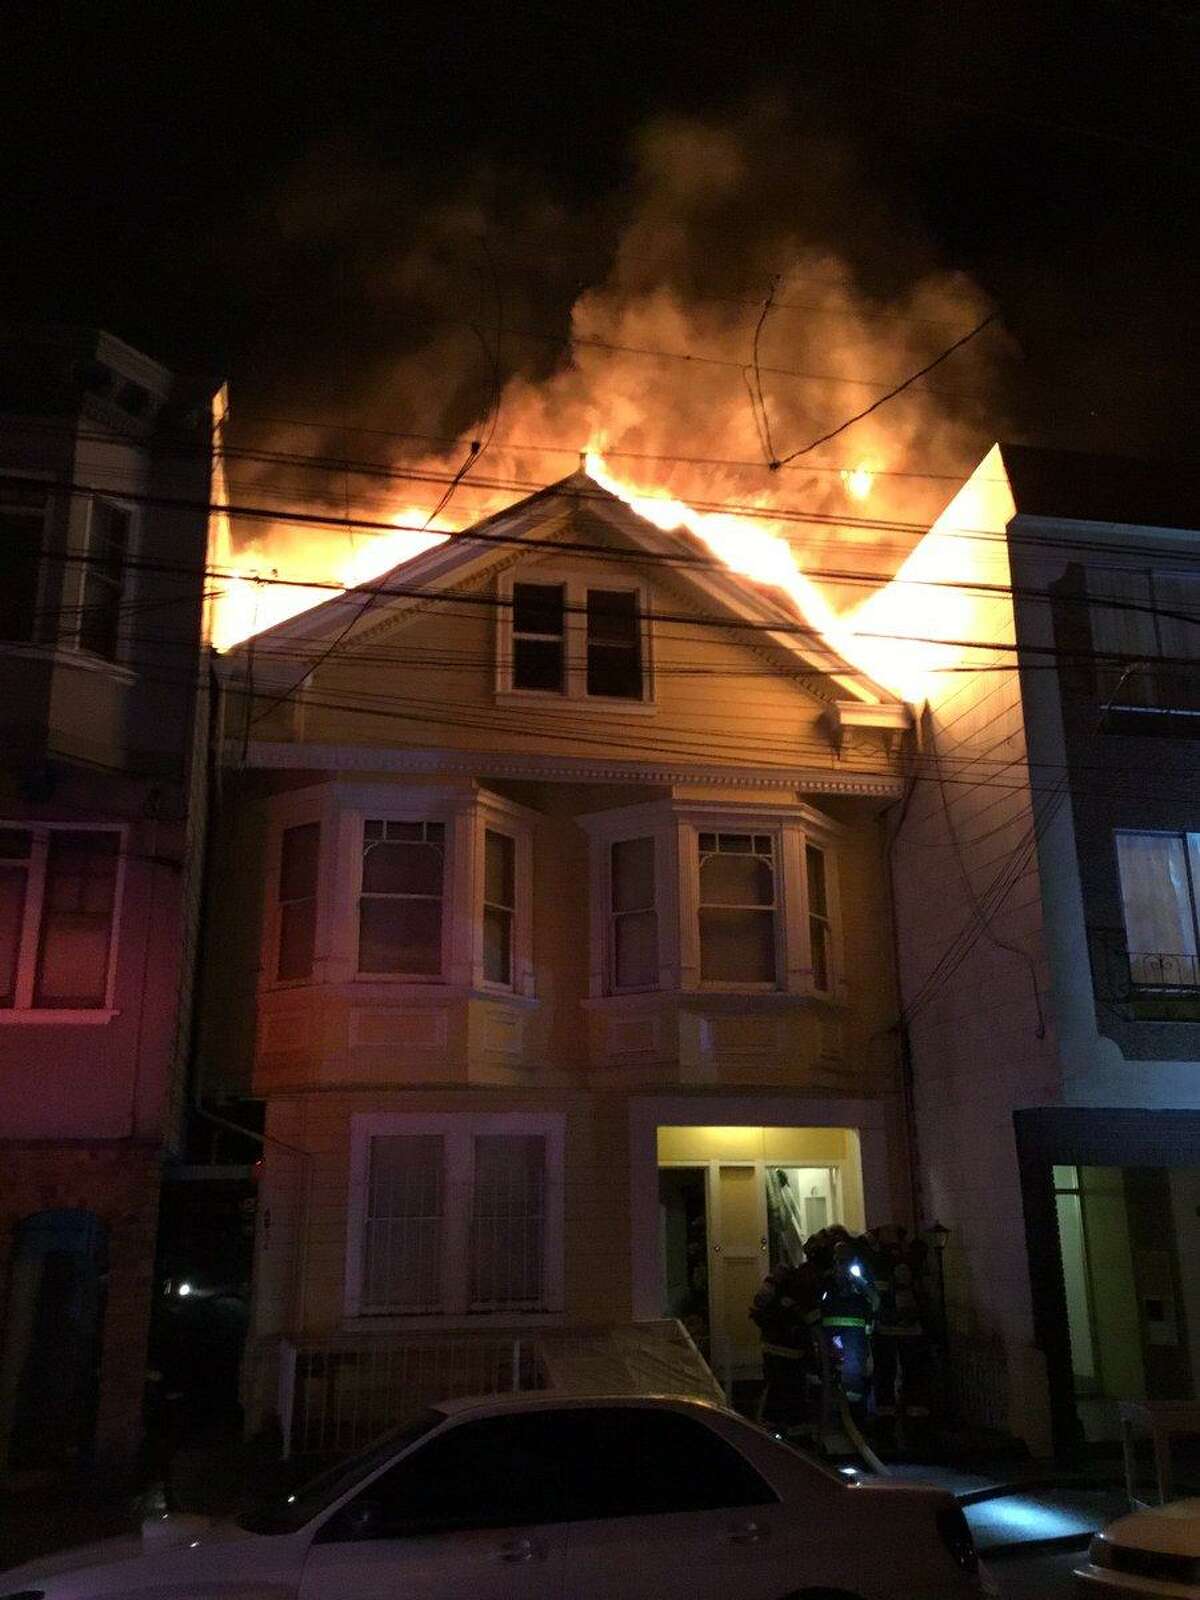 A heavy fire ripped through an apartment building in San Francisco’s Richmond District, injuring three people, officials said.